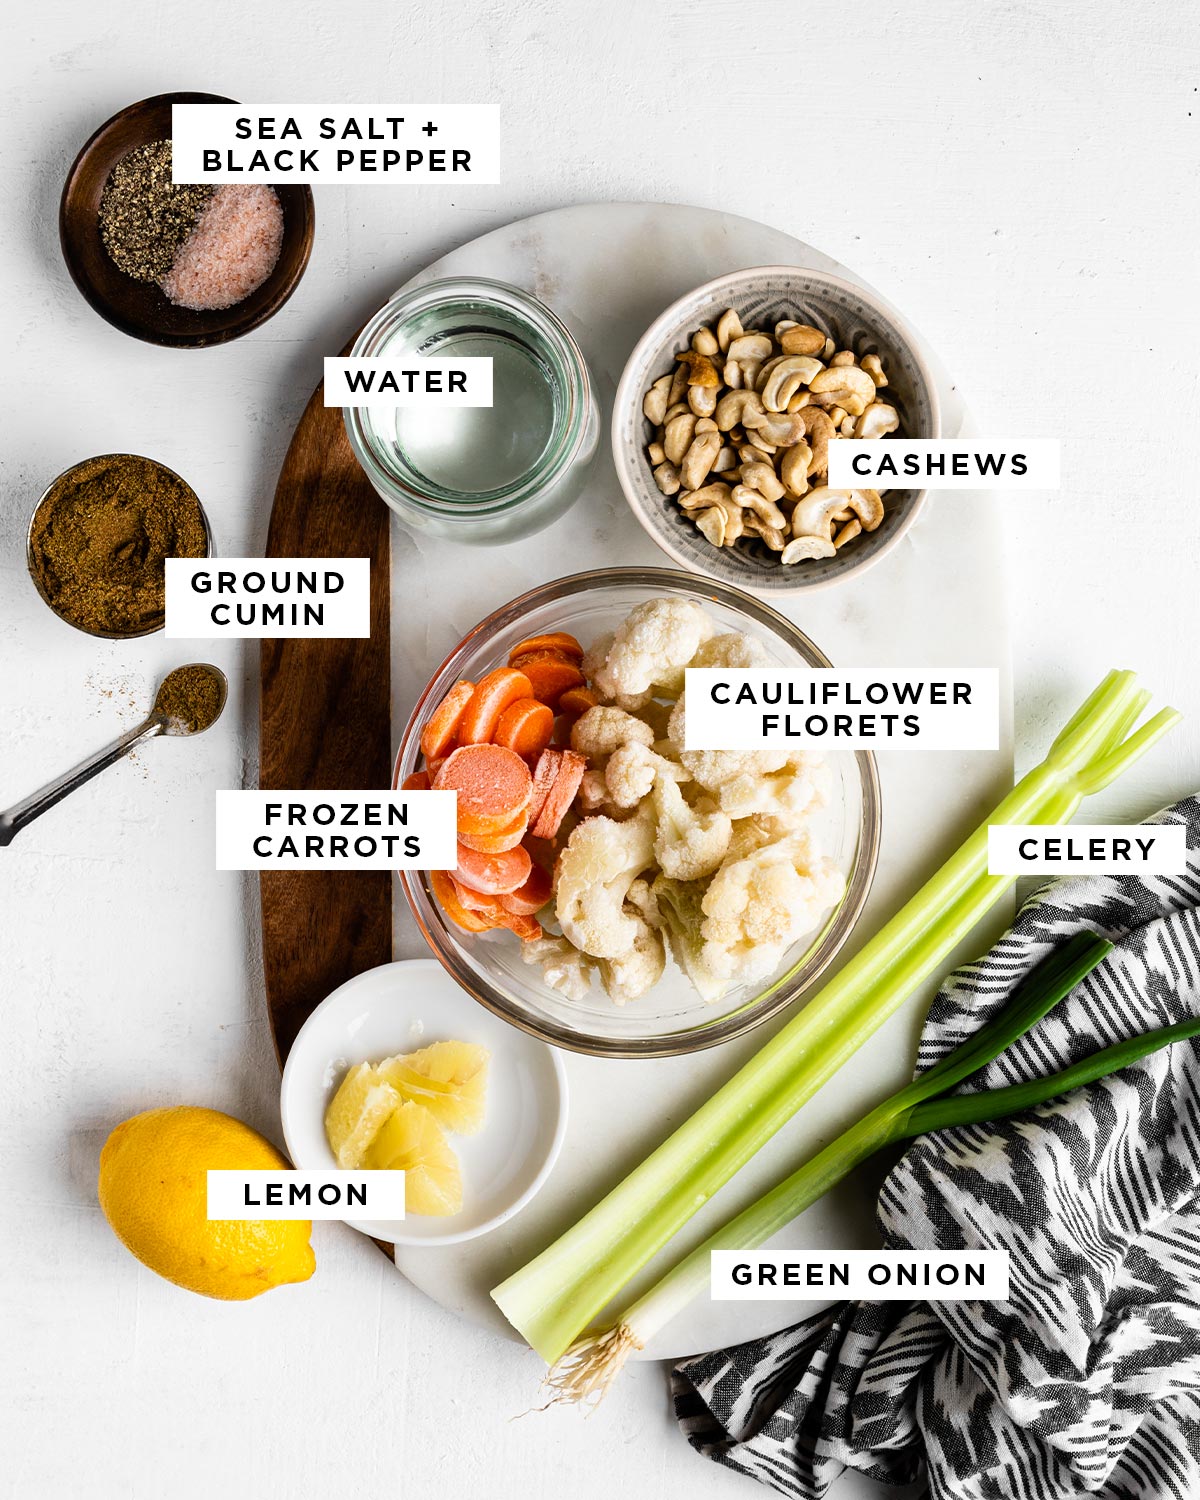 labeled ingredients for a savory beverage including sea salt, black pepper, water, cashews, ground cumin, cauliflower florets, frozen carrots, celery, lemon and green onion.